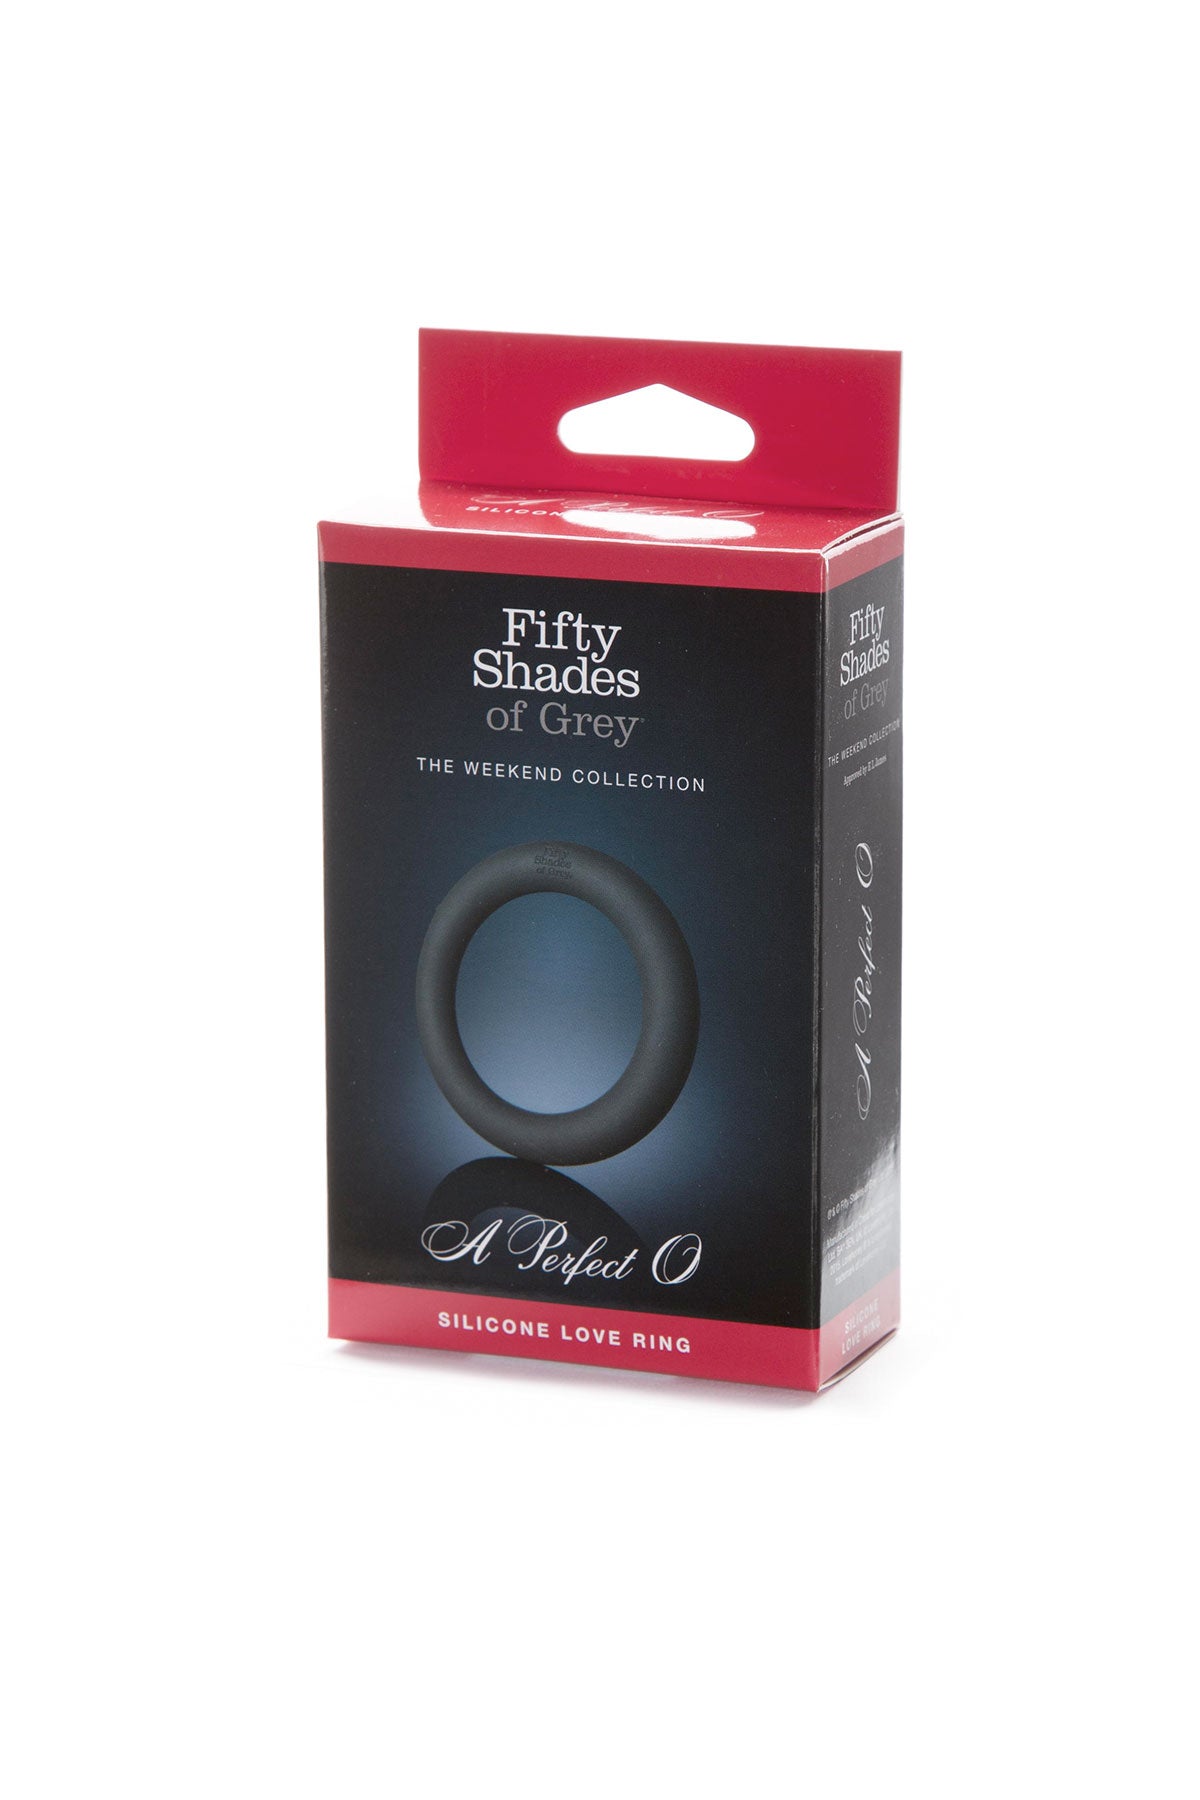 Perfect O Cock ring | Fifty Shades of Grey